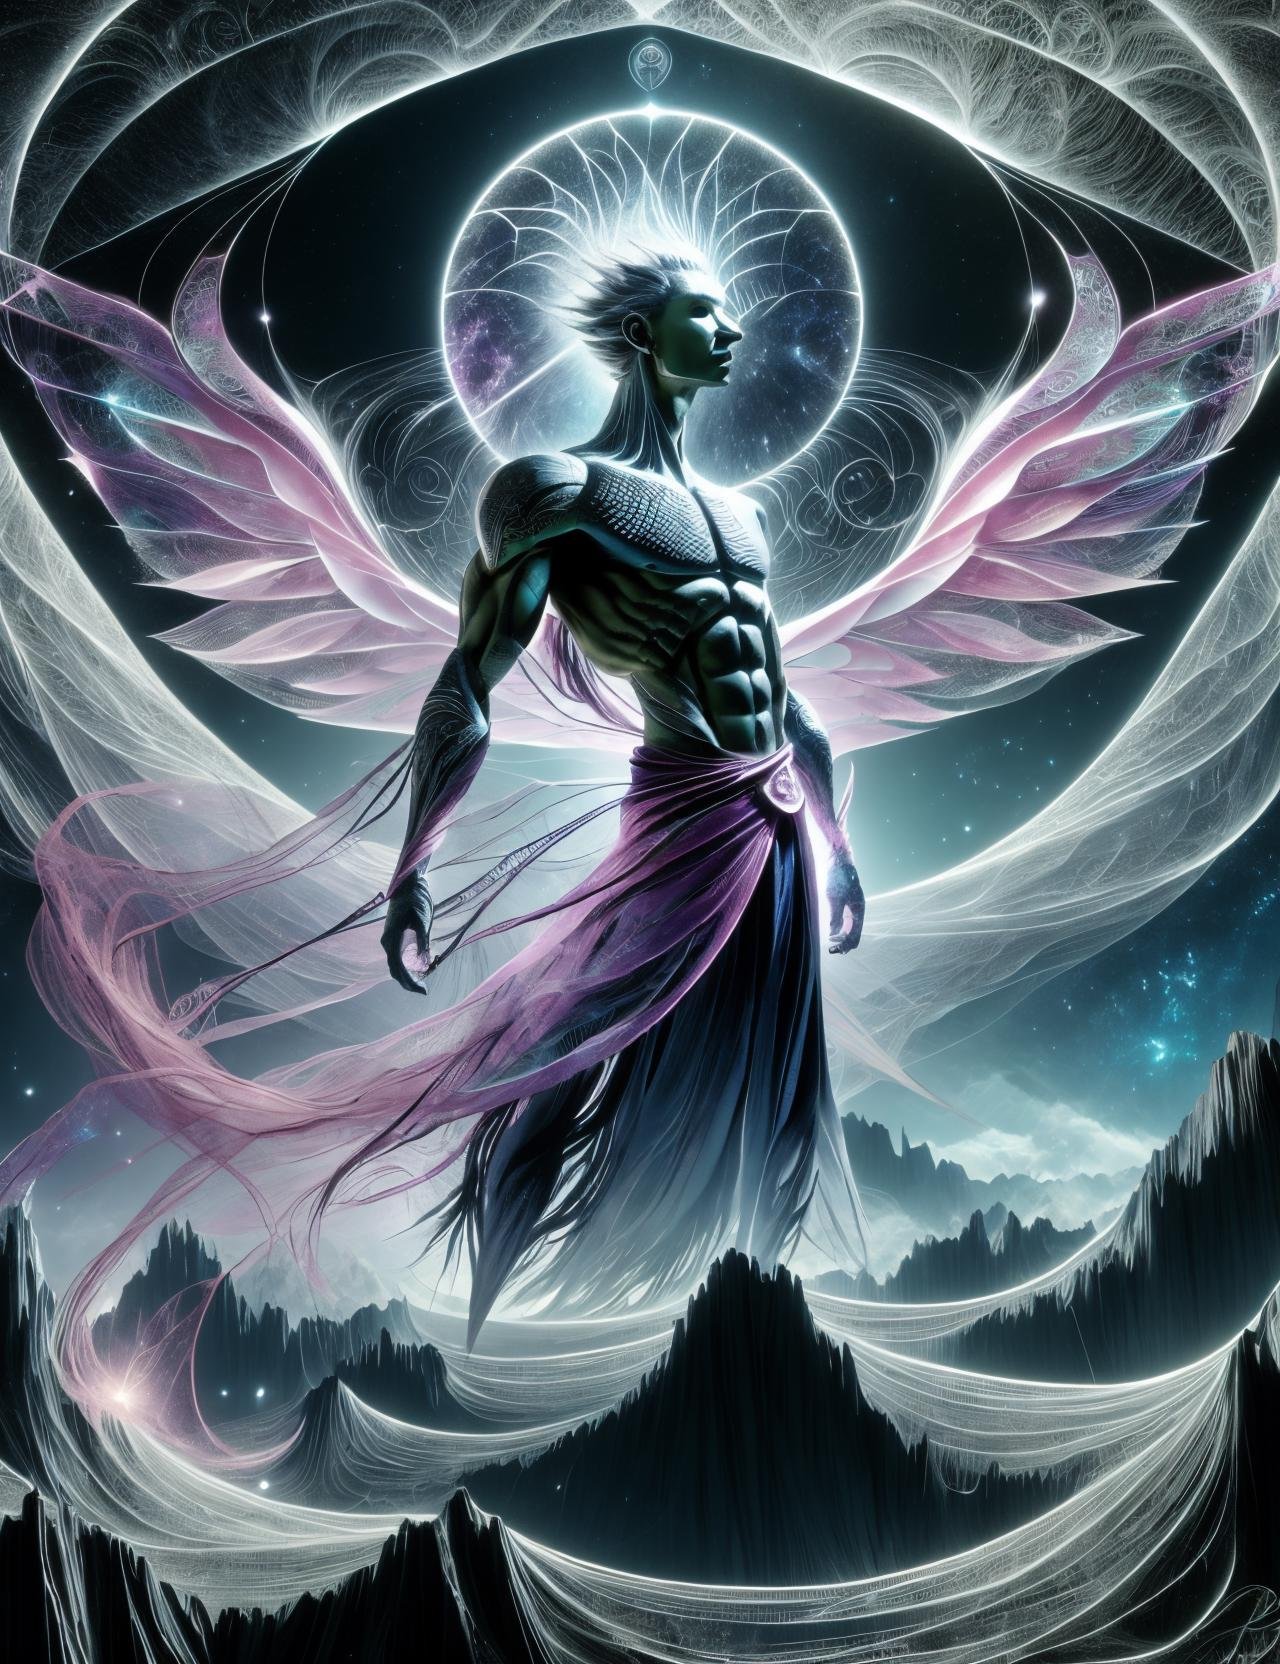 ((best quality)), ((masterpiece)), ((realistic,digital art)), (hyper detailed),DonMC0sm1cW3b heart, astral cosmic webs, male Sylph, humanoid elemental being, delicate and ethereal beings with gossamer wings, guardians of the air, mountain top,weather, Geriatric Muscular, Polynesian, Black eyes, Flared Ears,  Unusual Chin,  High Cheekbones,  Heart face shape with Pointed Chin, Athletic Build,  , Grey Dreadlocks hair, Gratitude,, Weaving spells into fabric, creating enchanted garments and cloaks,  Mystic, (Enchanted,Circulation,Cyan,Coral Pink Channel,Conjure,Glamour ,Self-healing Concrete Wave propagation,Parallel liness,Cylinder,Colloids magic:1.0) Healing Waters , Arms swirling in circular motions, summoning a cyclone of magic, Twilight Spark <lora:DonMC0sm1cW3b-000009:0.9> 